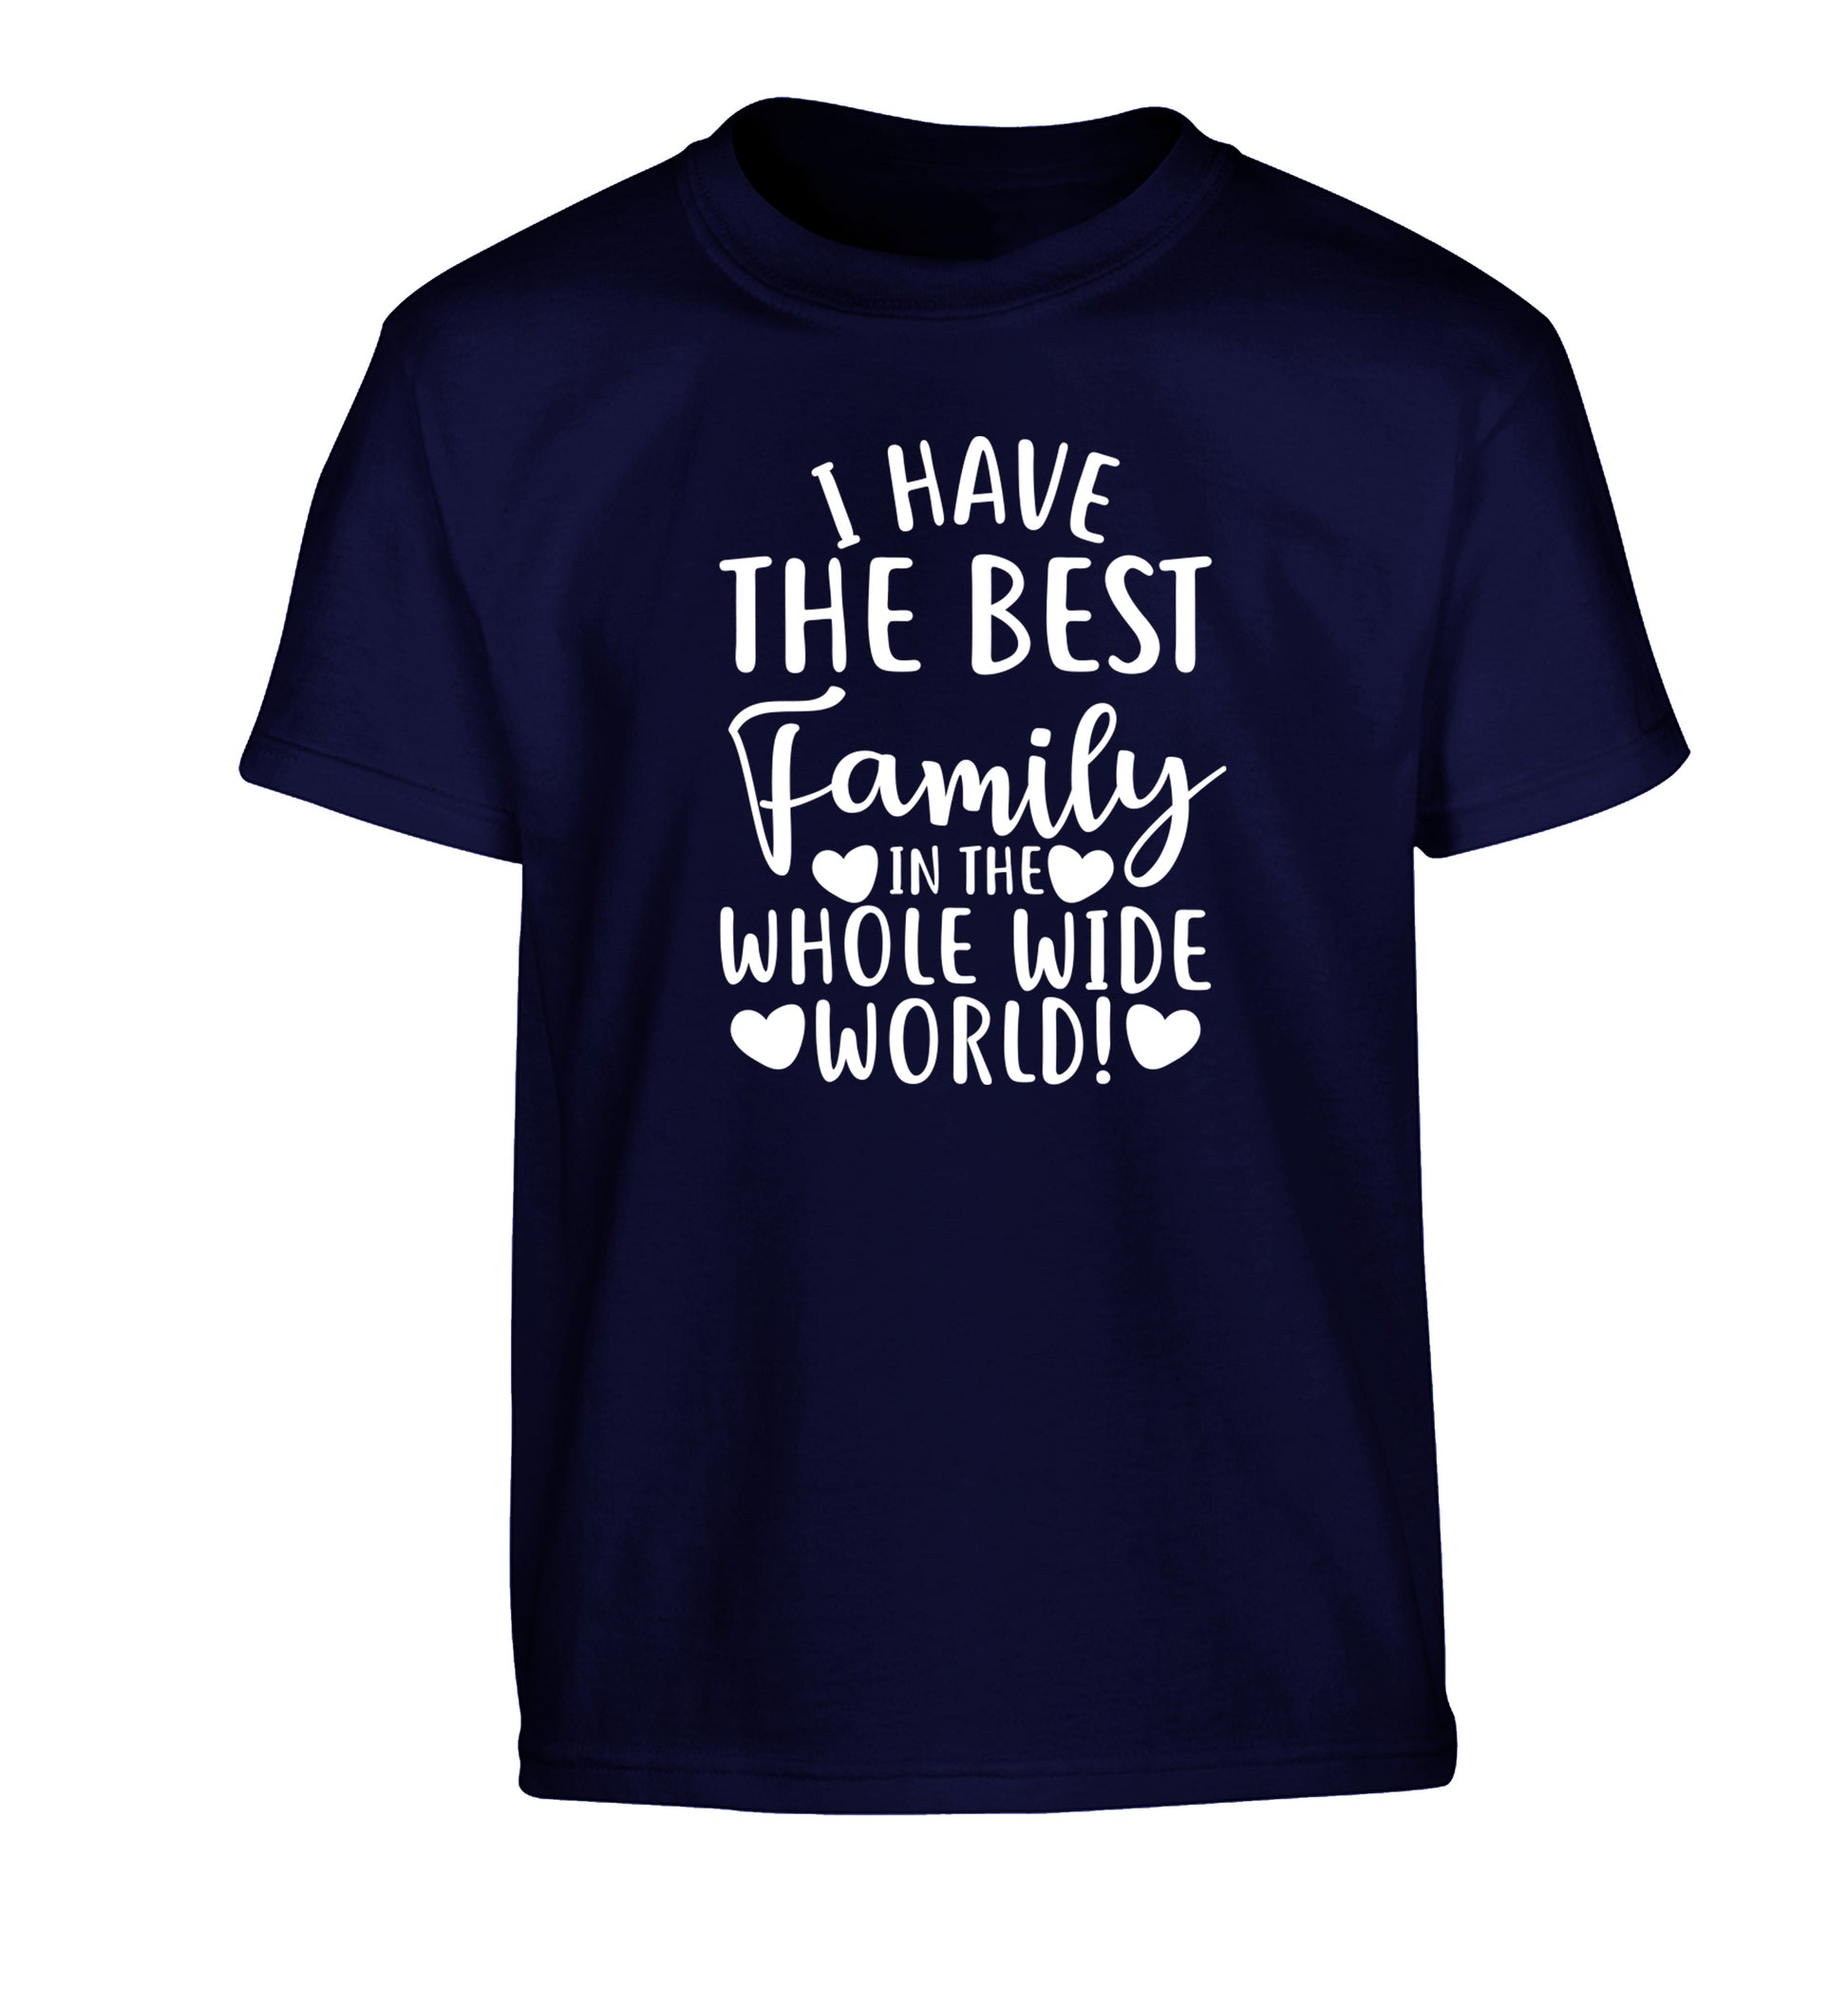 I have the best family in the whole wide world! Children's navy Tshirt 12-13 Years